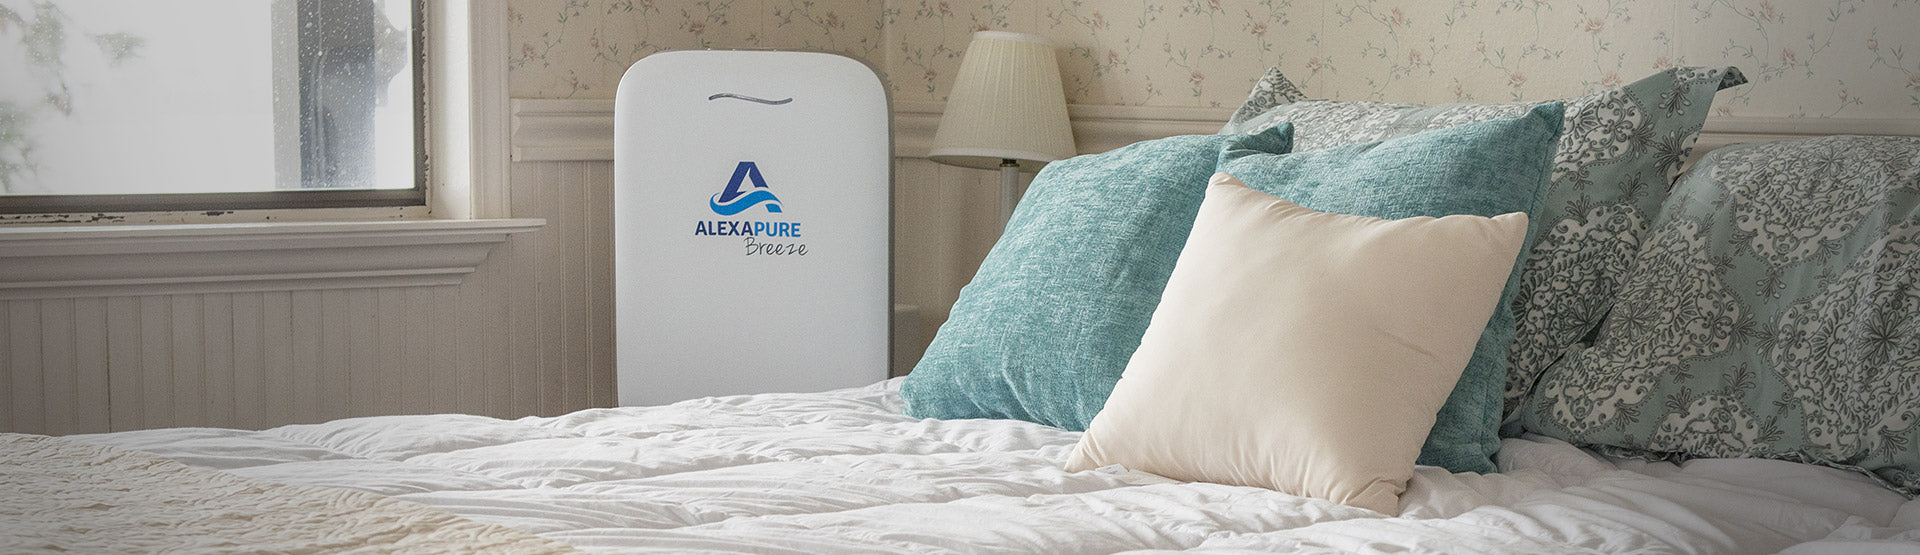 The Alexapure Breeze True Hepa Air Purifier sitting next to a bed